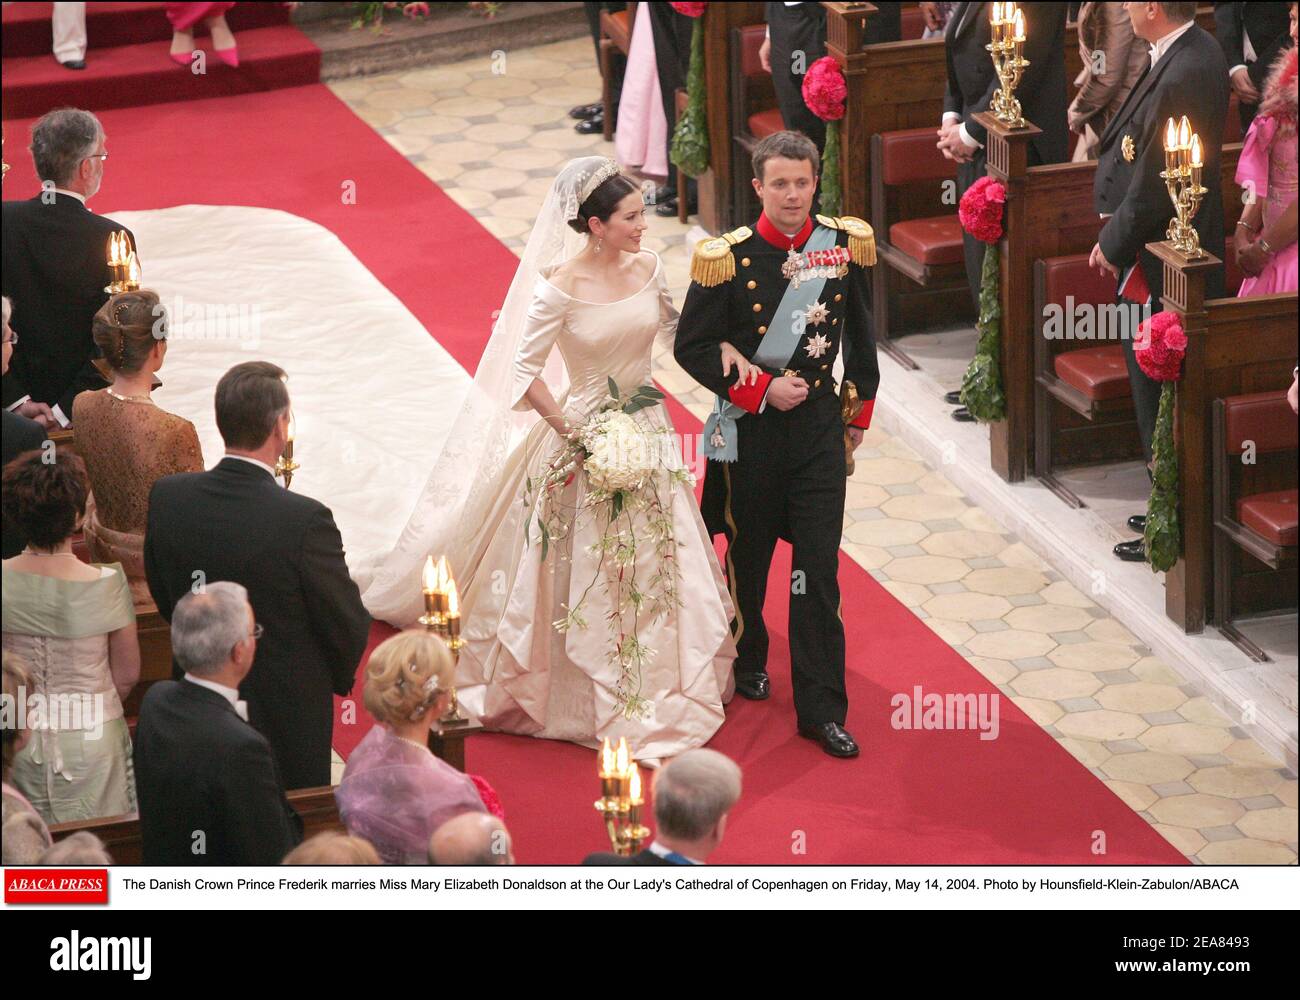 The Danish Crown Prince Frederik marries Miss Mary Elizabeth Donaldson at  the Our Lady's Cathedral of Copenhagen on Friday, May 14, 2004. Photo by  Hounsfield-Klein-Zabulon/ABACA Stock Photo - Alamy